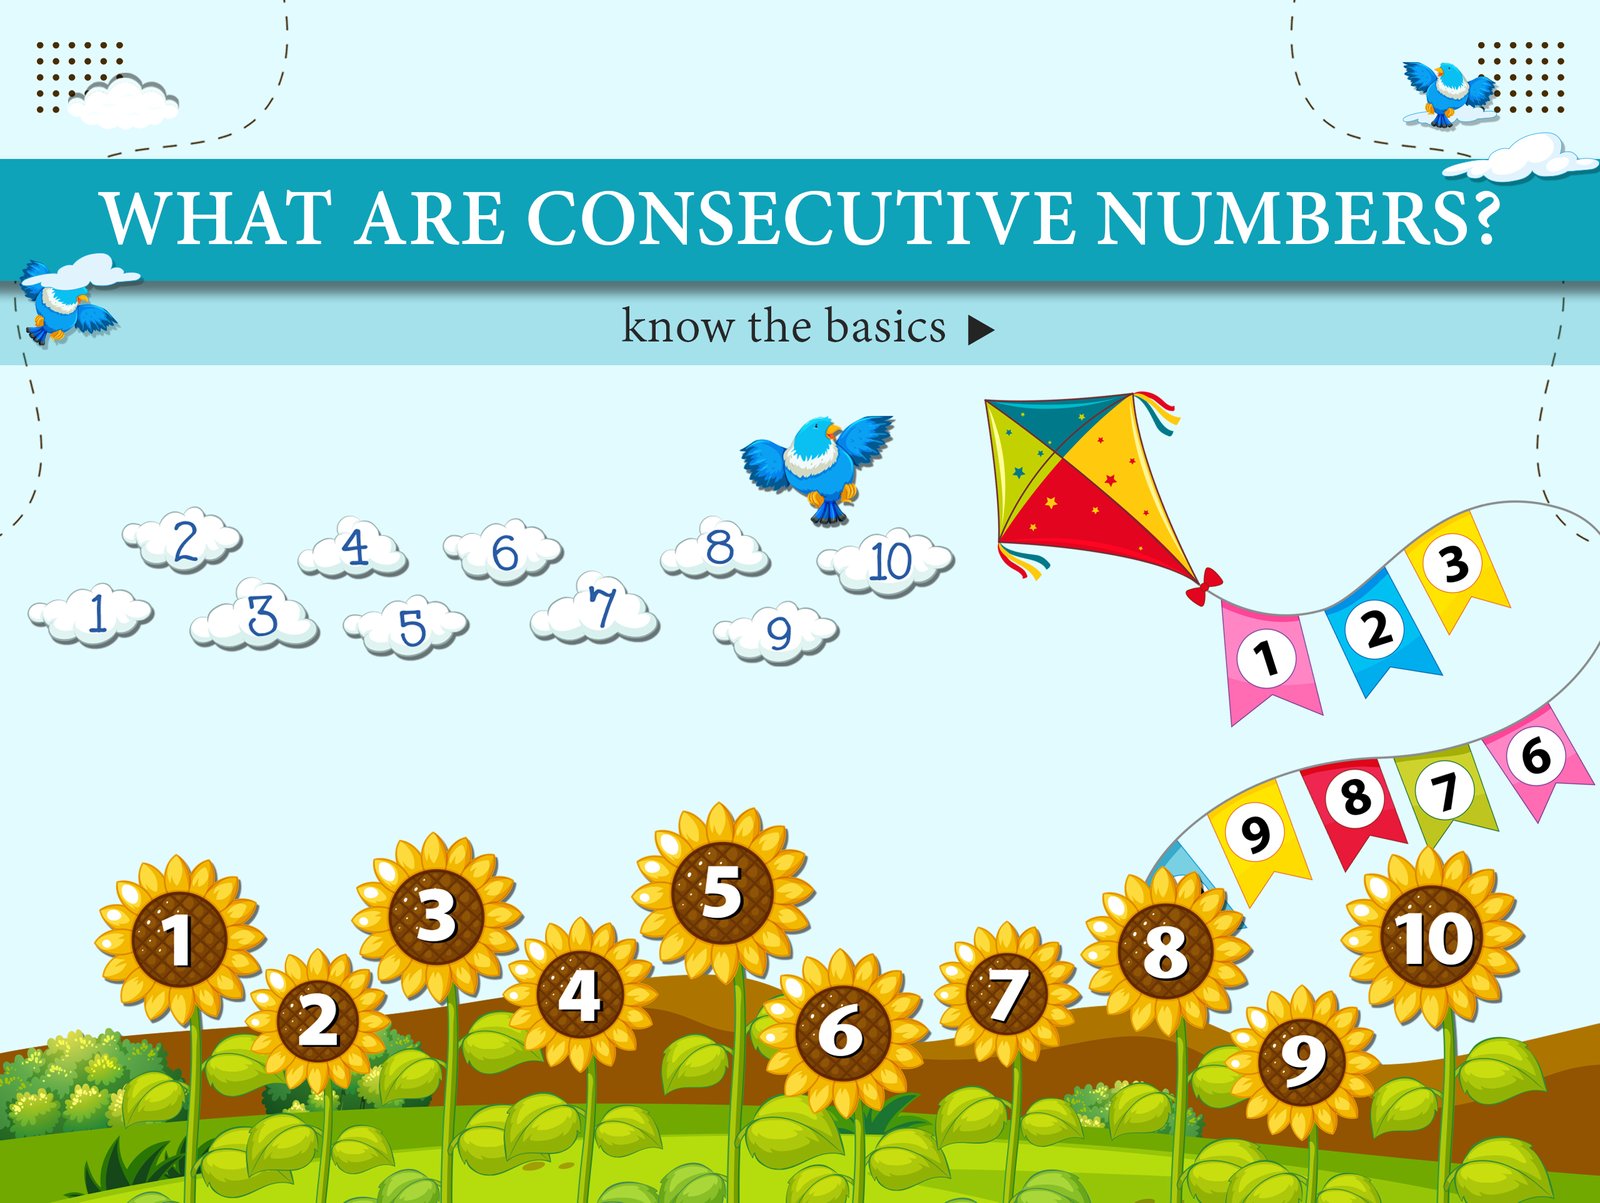 What are consecutive numbers?